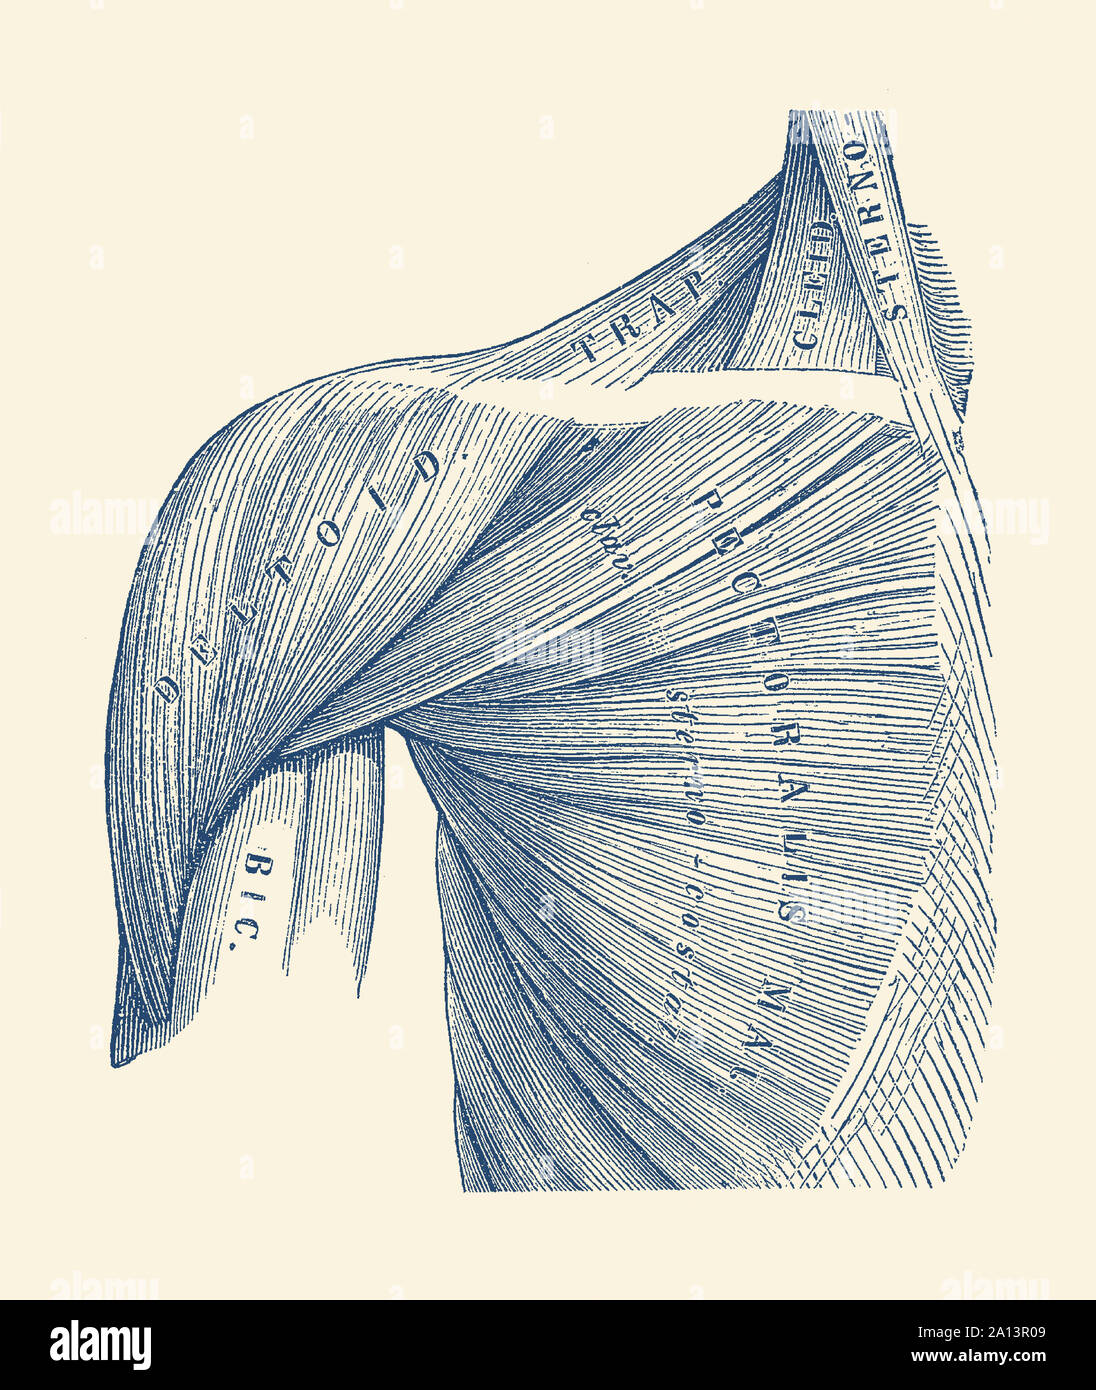 Vintage diagram of the muscles within the upper arm, shoulder, and neck. Stock Photo